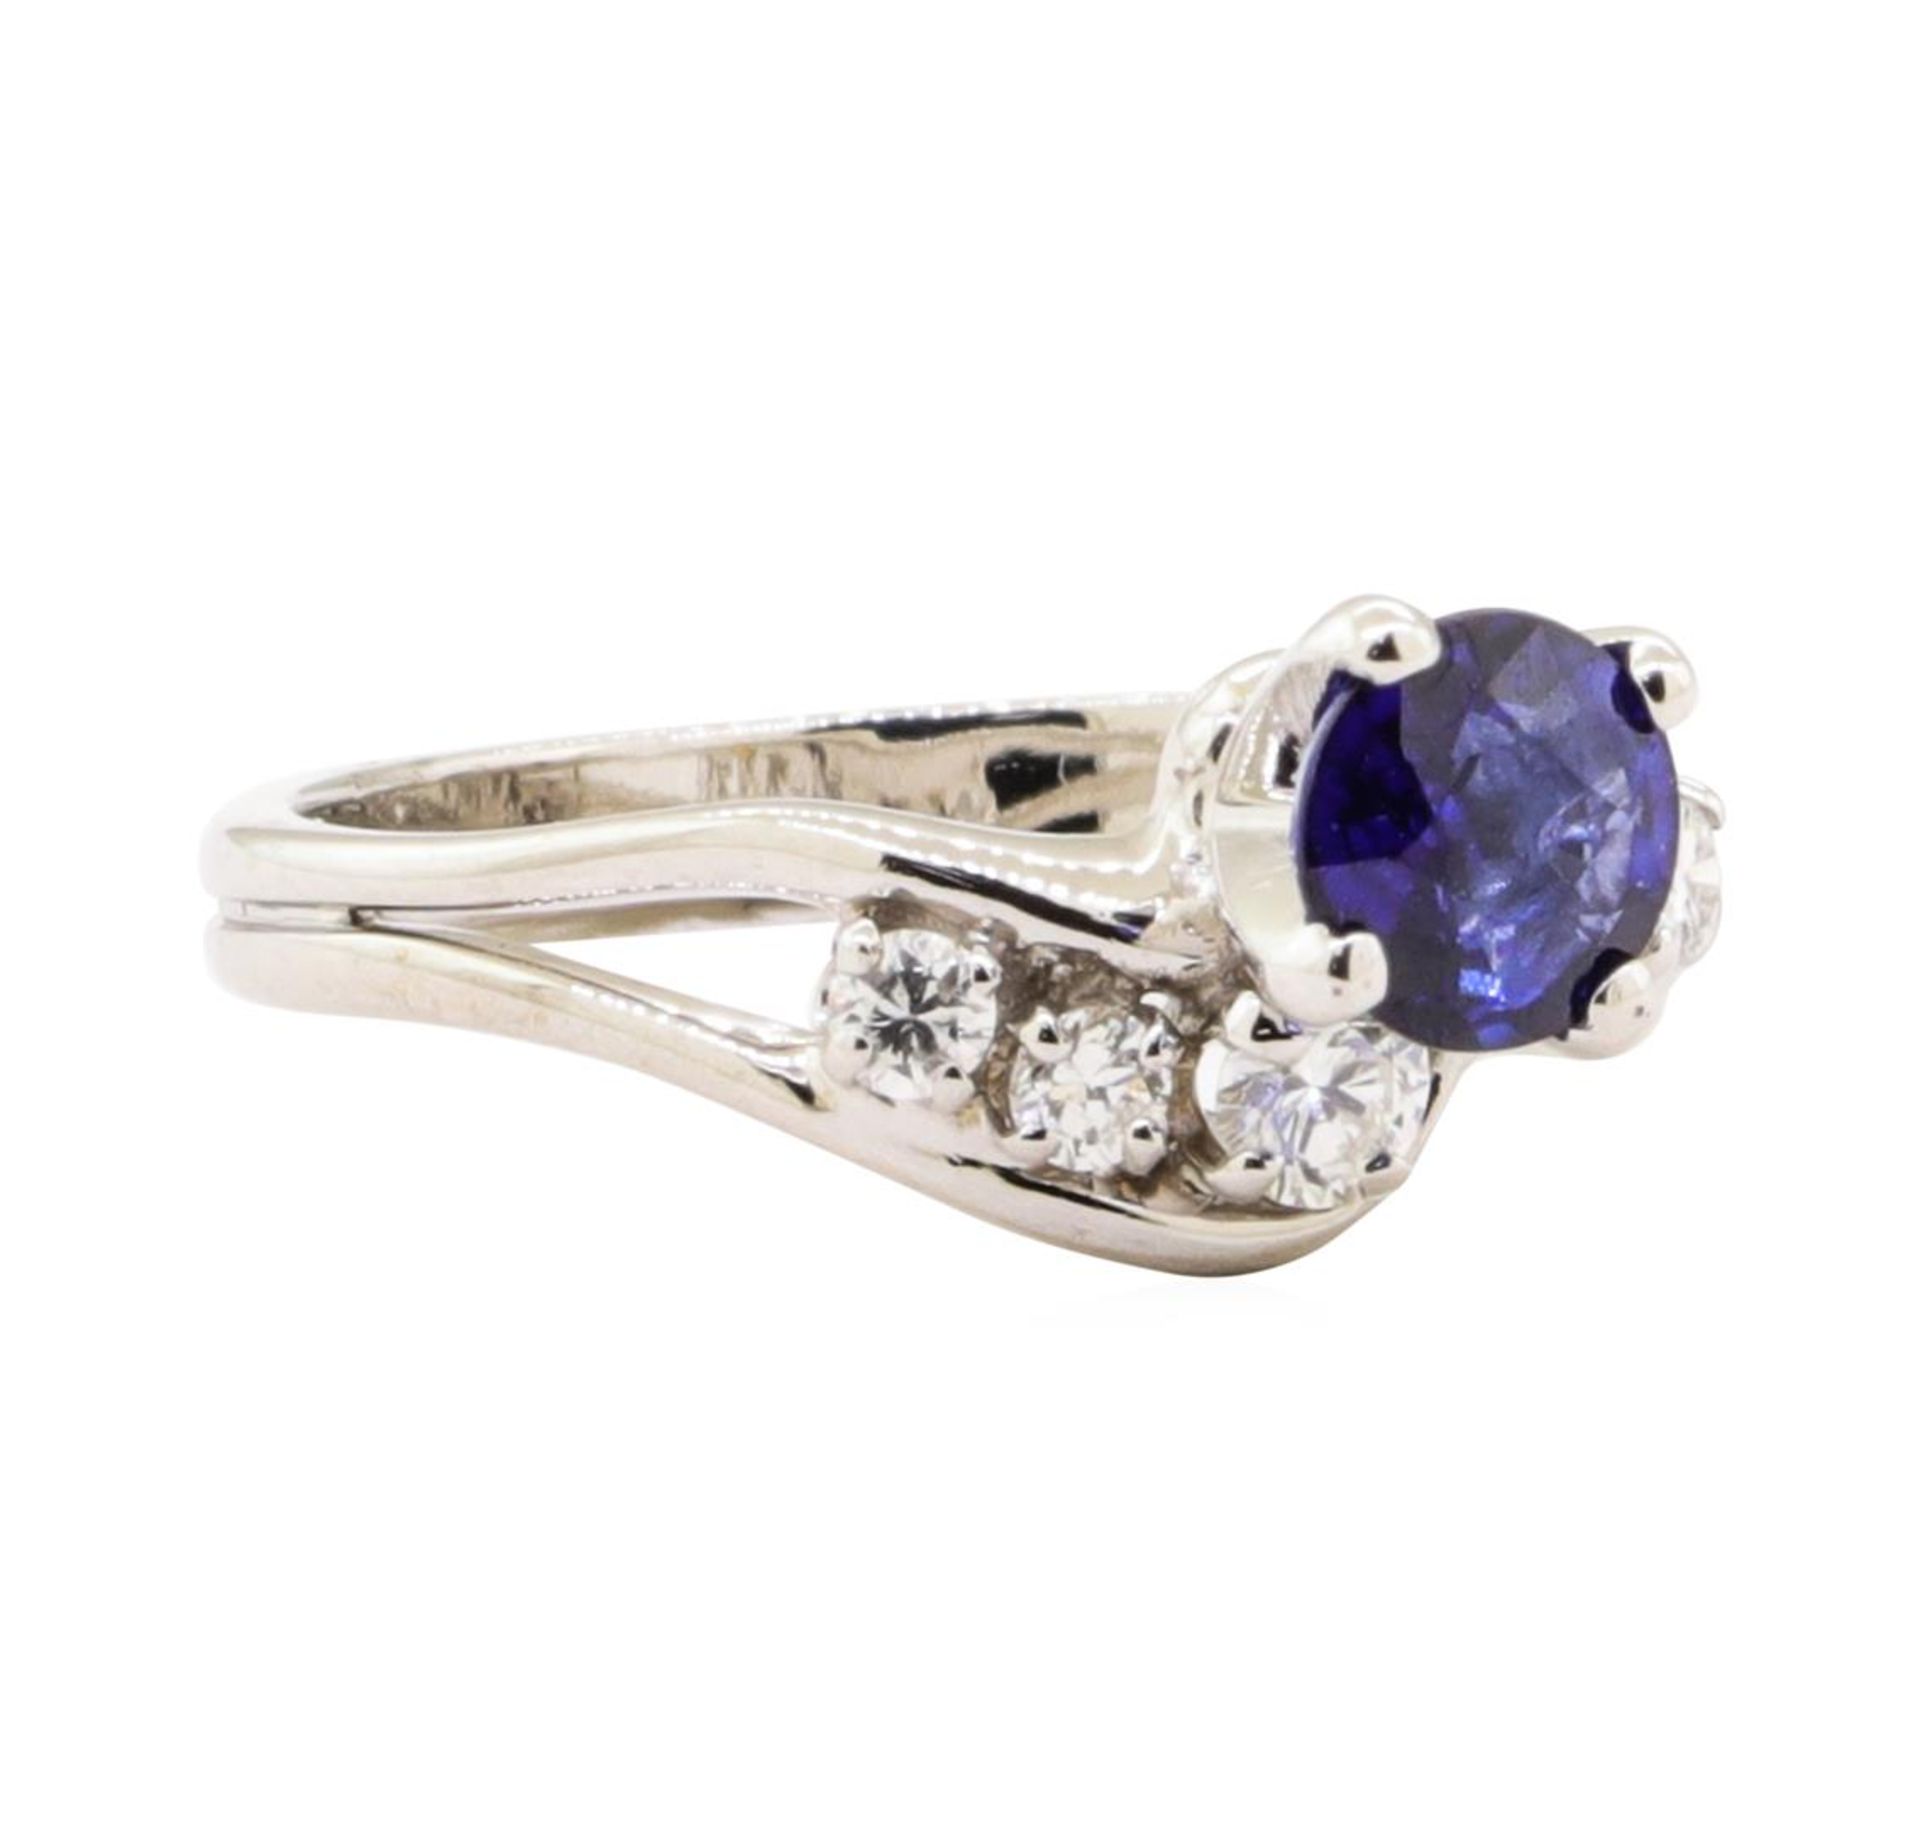 0.92ctw Blue Sapphire and Diamond Ring - 14KT White Gold